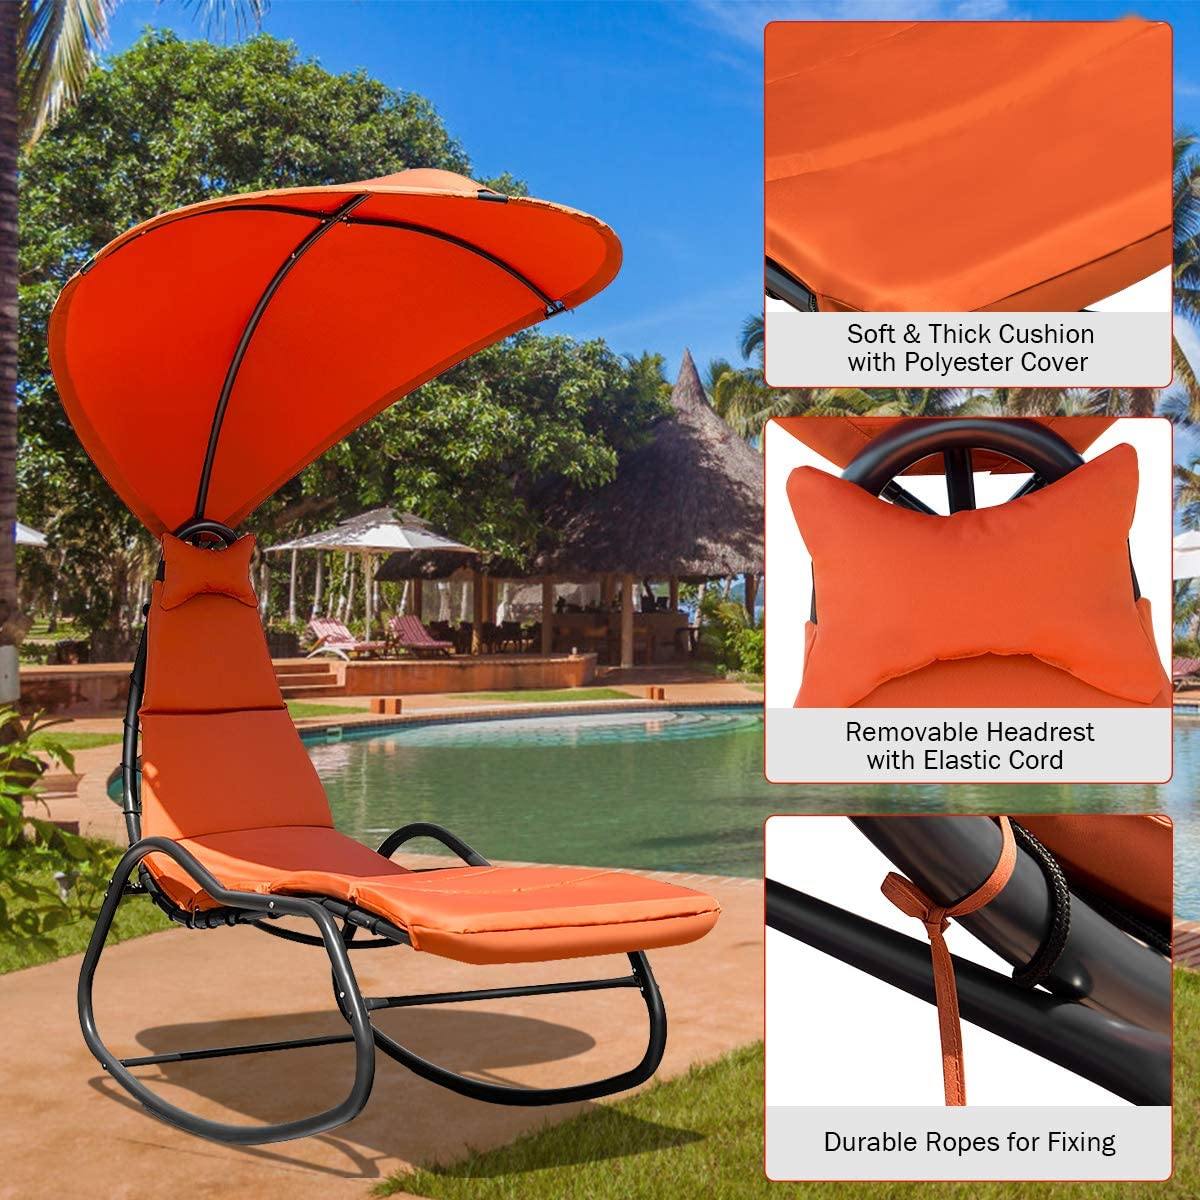 Chaise Lounge Swing Chair, Outdoor Hammock with Stand and Canopy - Giantexus